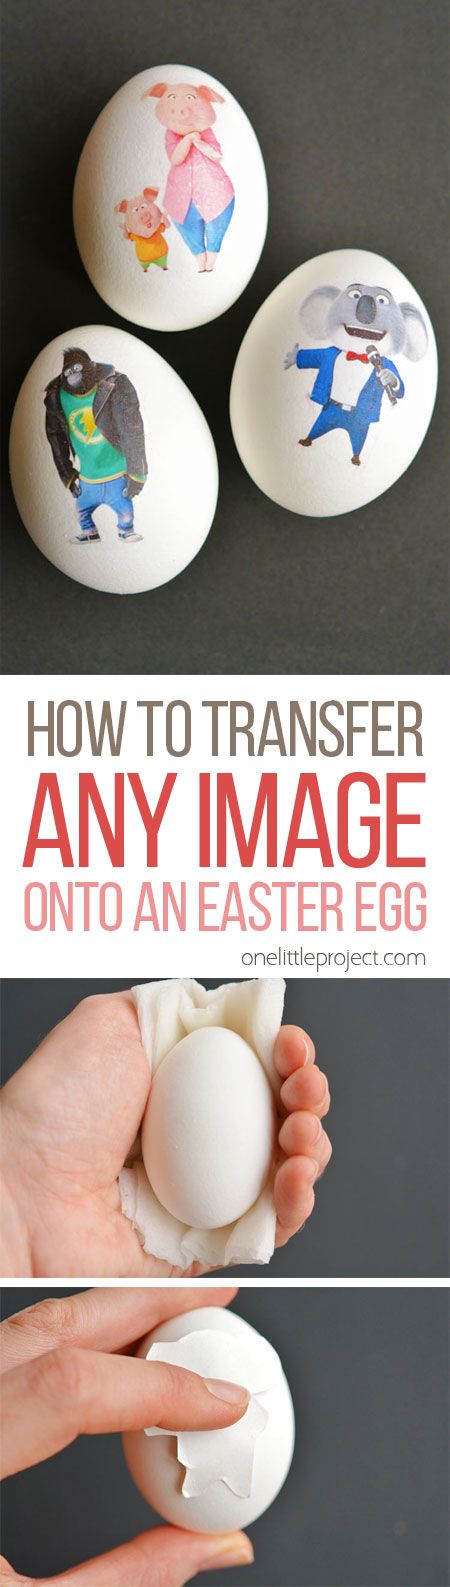 It's SO EASY to transfer any image onto an Easter egg! They end up looking bright and colourful and you can use any images you like! Such a fun project to try with your little ones this year!